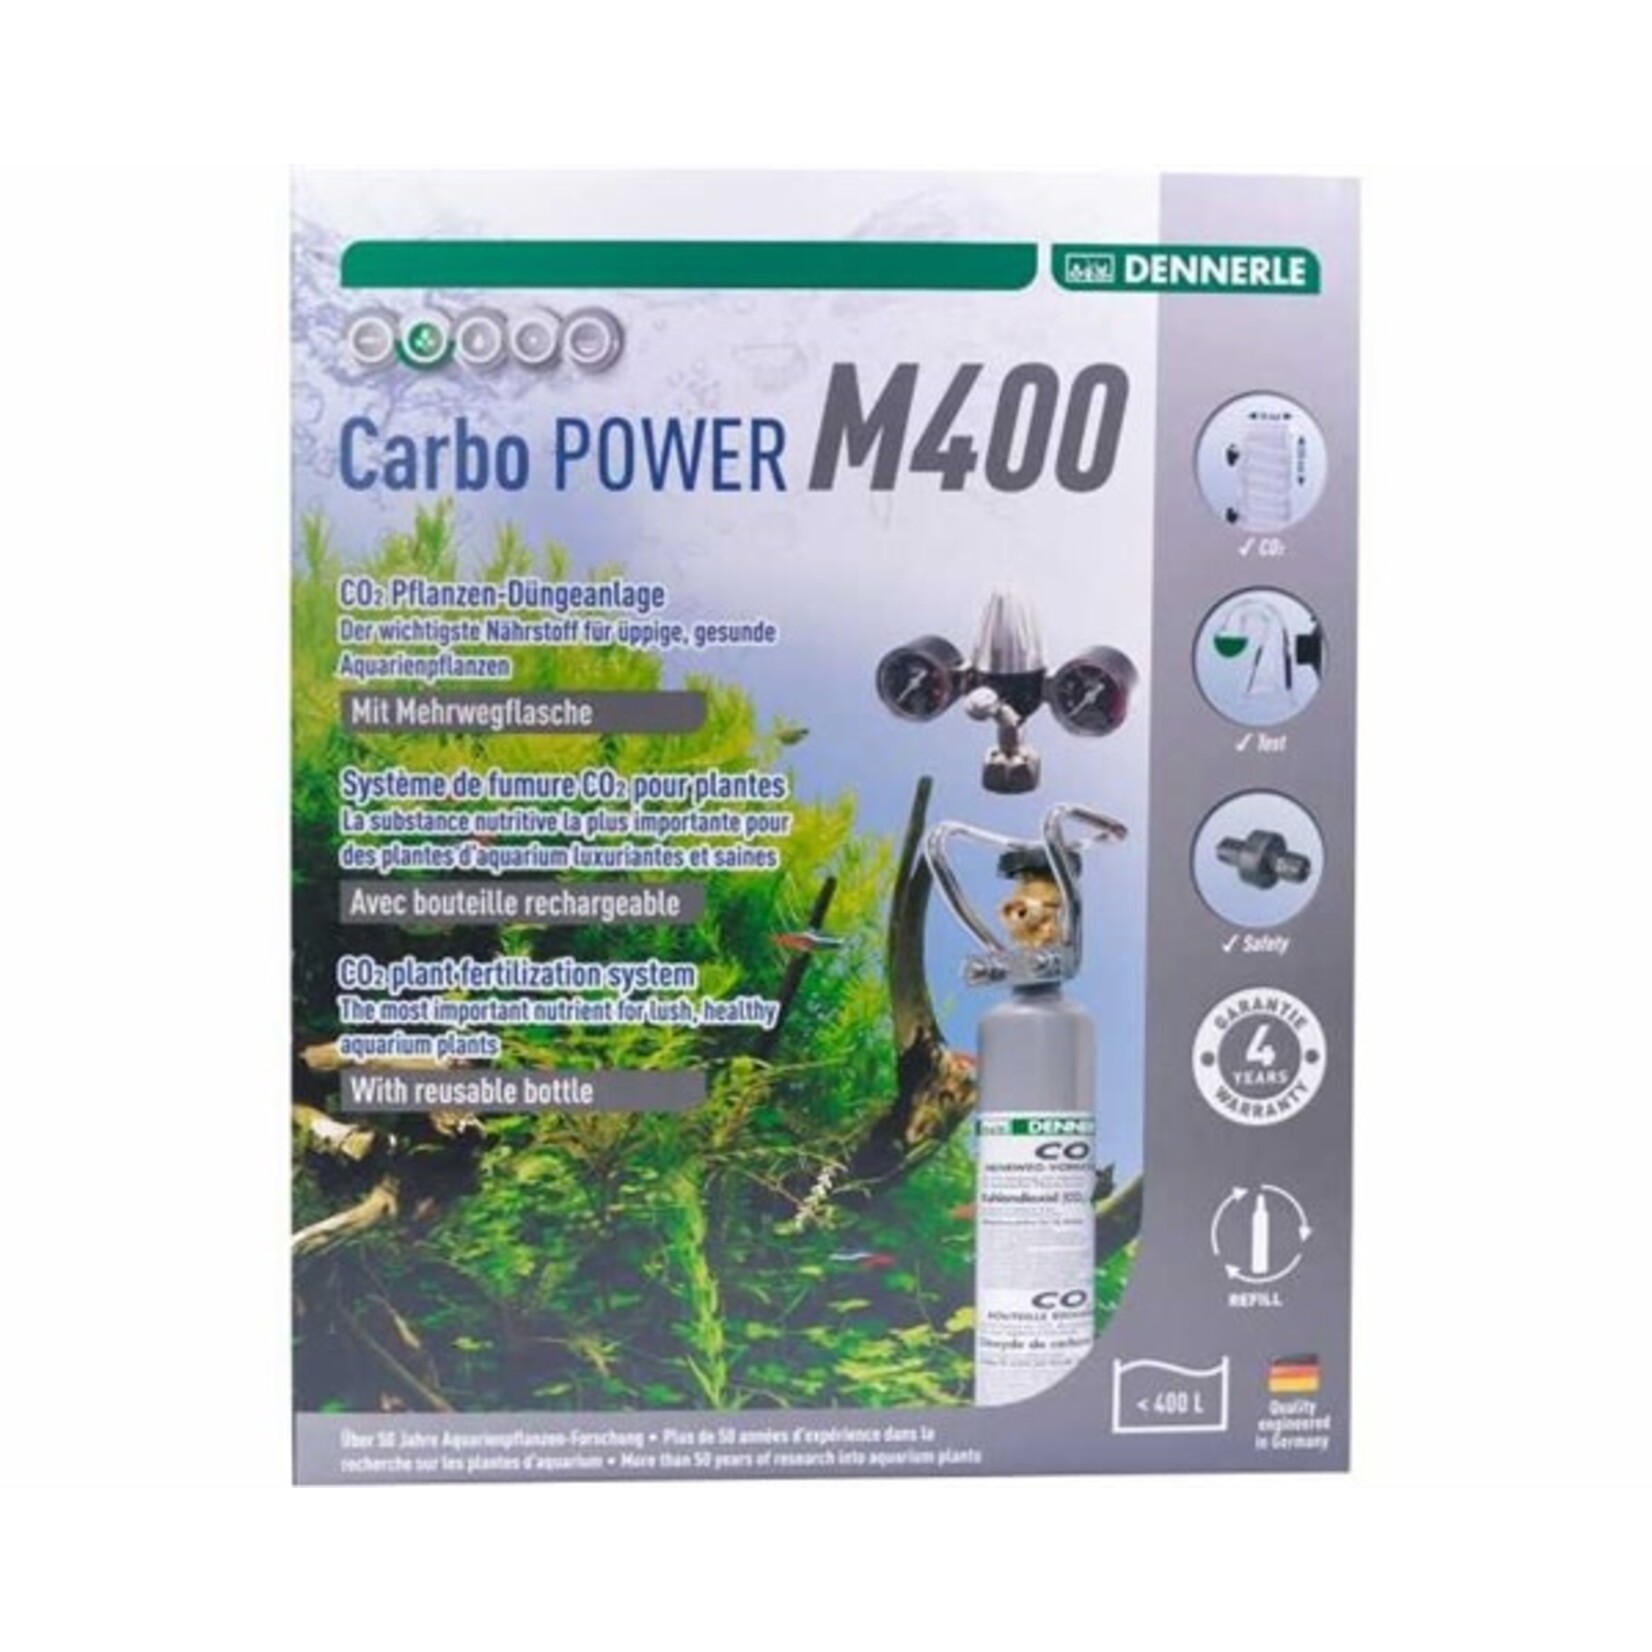 Dennerle DENNERLE CO2 CARBO POWER M400